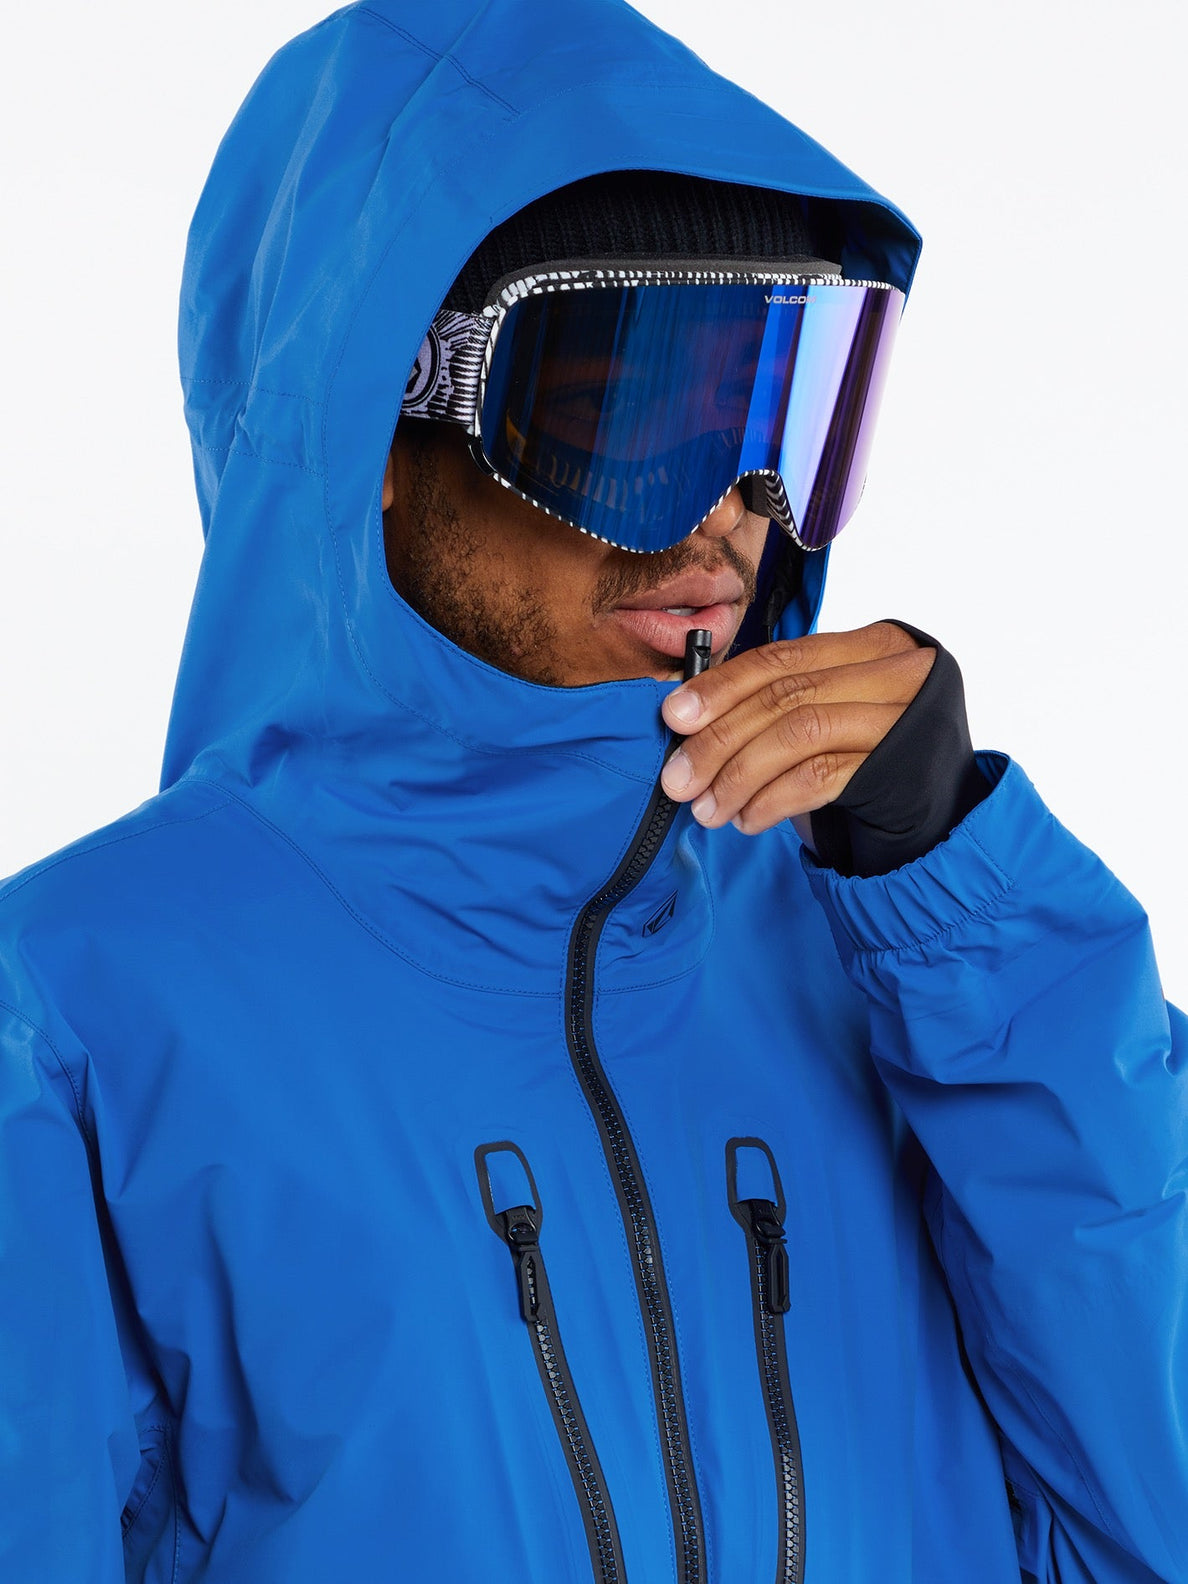 Tds Infrared Gore-Tex Jacke - ELECTRIC BLUE